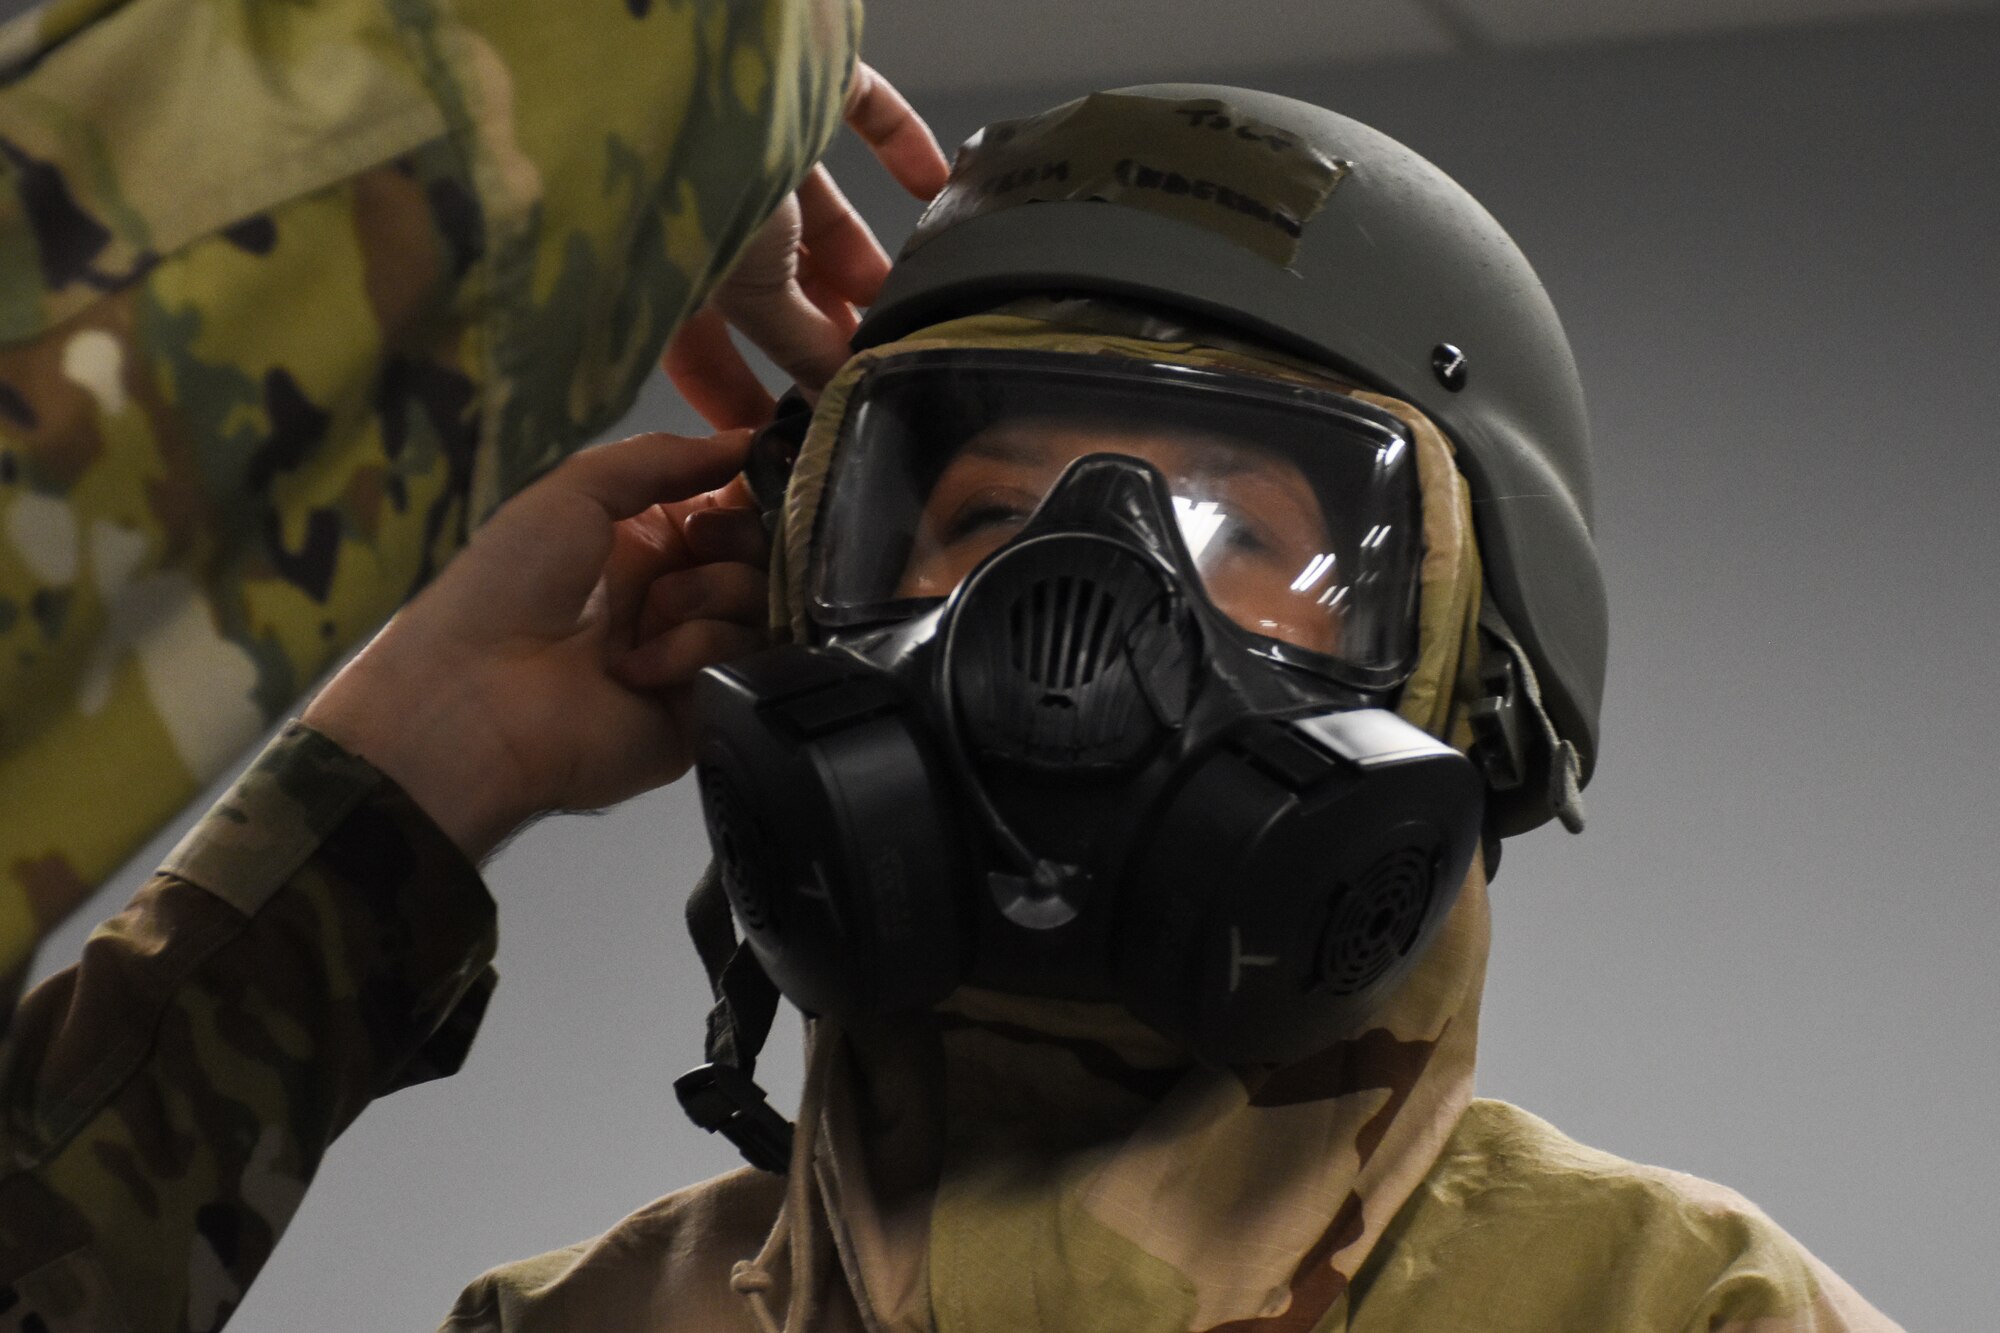 Tech. Sgt. Rebekah Underwood, a knowledge operations technician with the 442d Communications Flight, dons mission-oriented protective posture level 3 during a wing level readiness exercise, Ozark Thunder 20-01, at Whiteman Air Force Base, Mo., Nov. 3, 2019. During the exercise, Airmen participated in chemical warfare training and self-aid buddy care training while also performing their normal job duties to validate the wing’s ability to perform mission essential tasks during contingency operations.